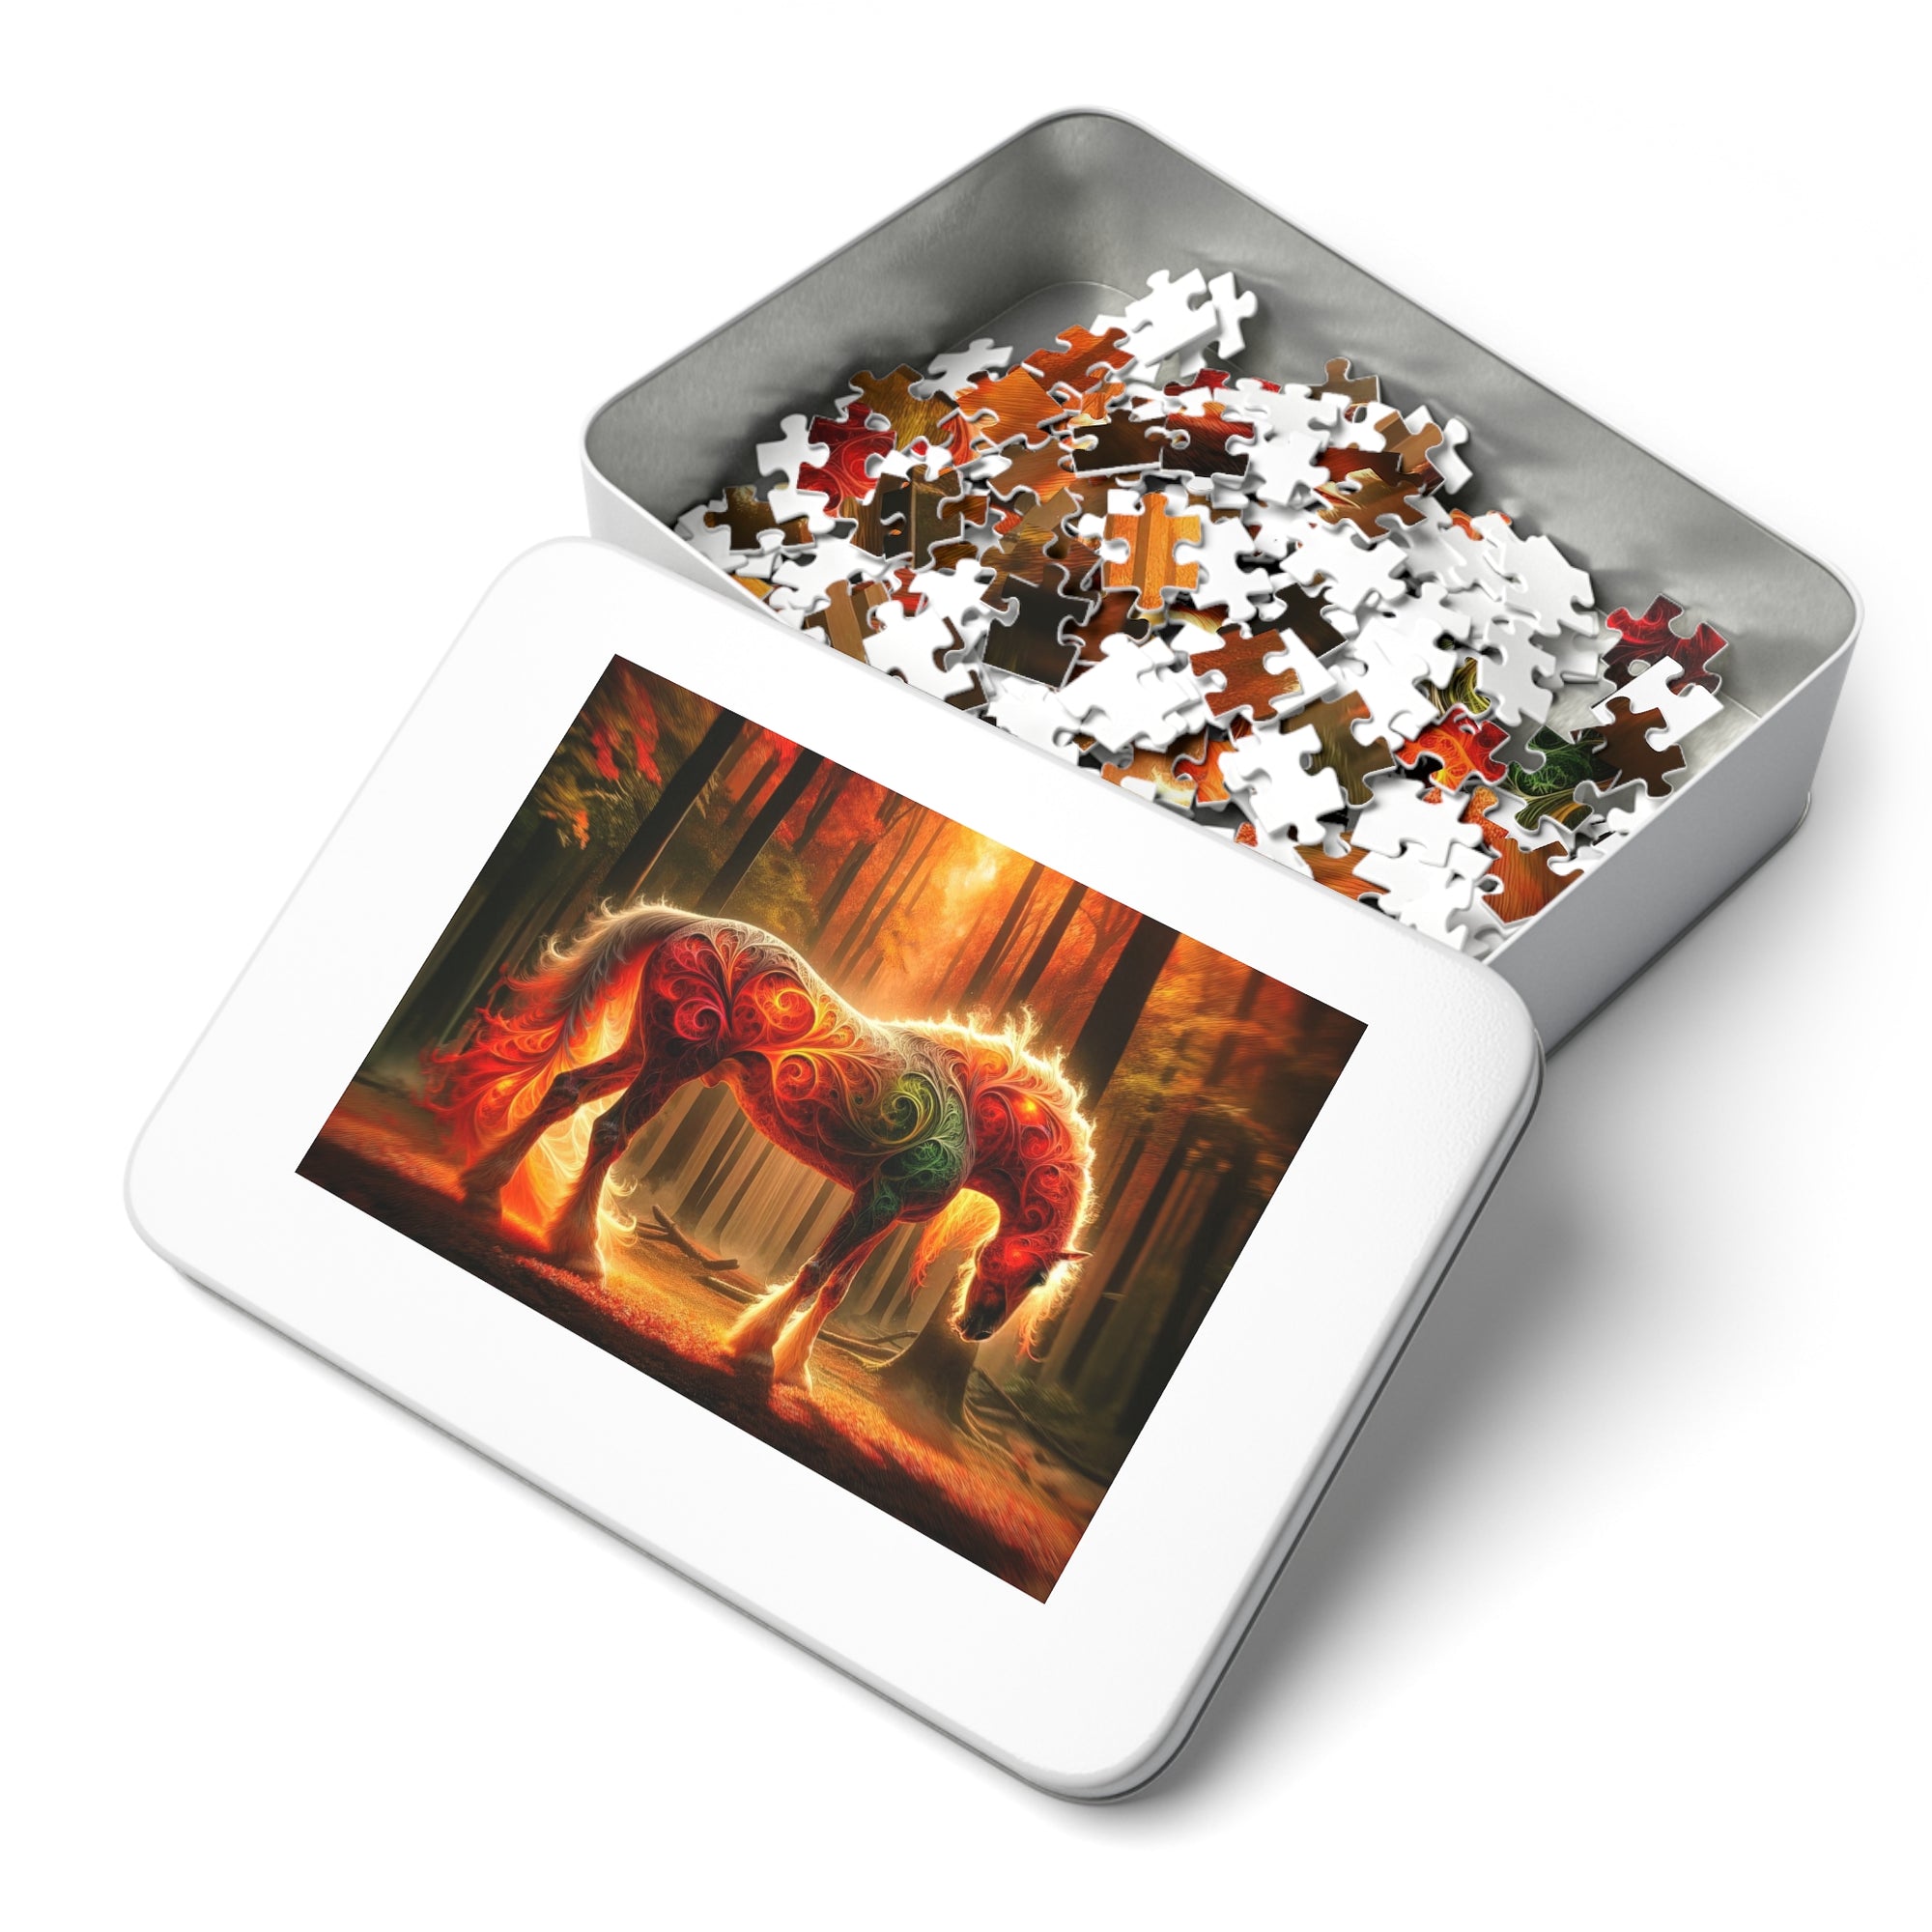 The Incandescent Steed Puzzle